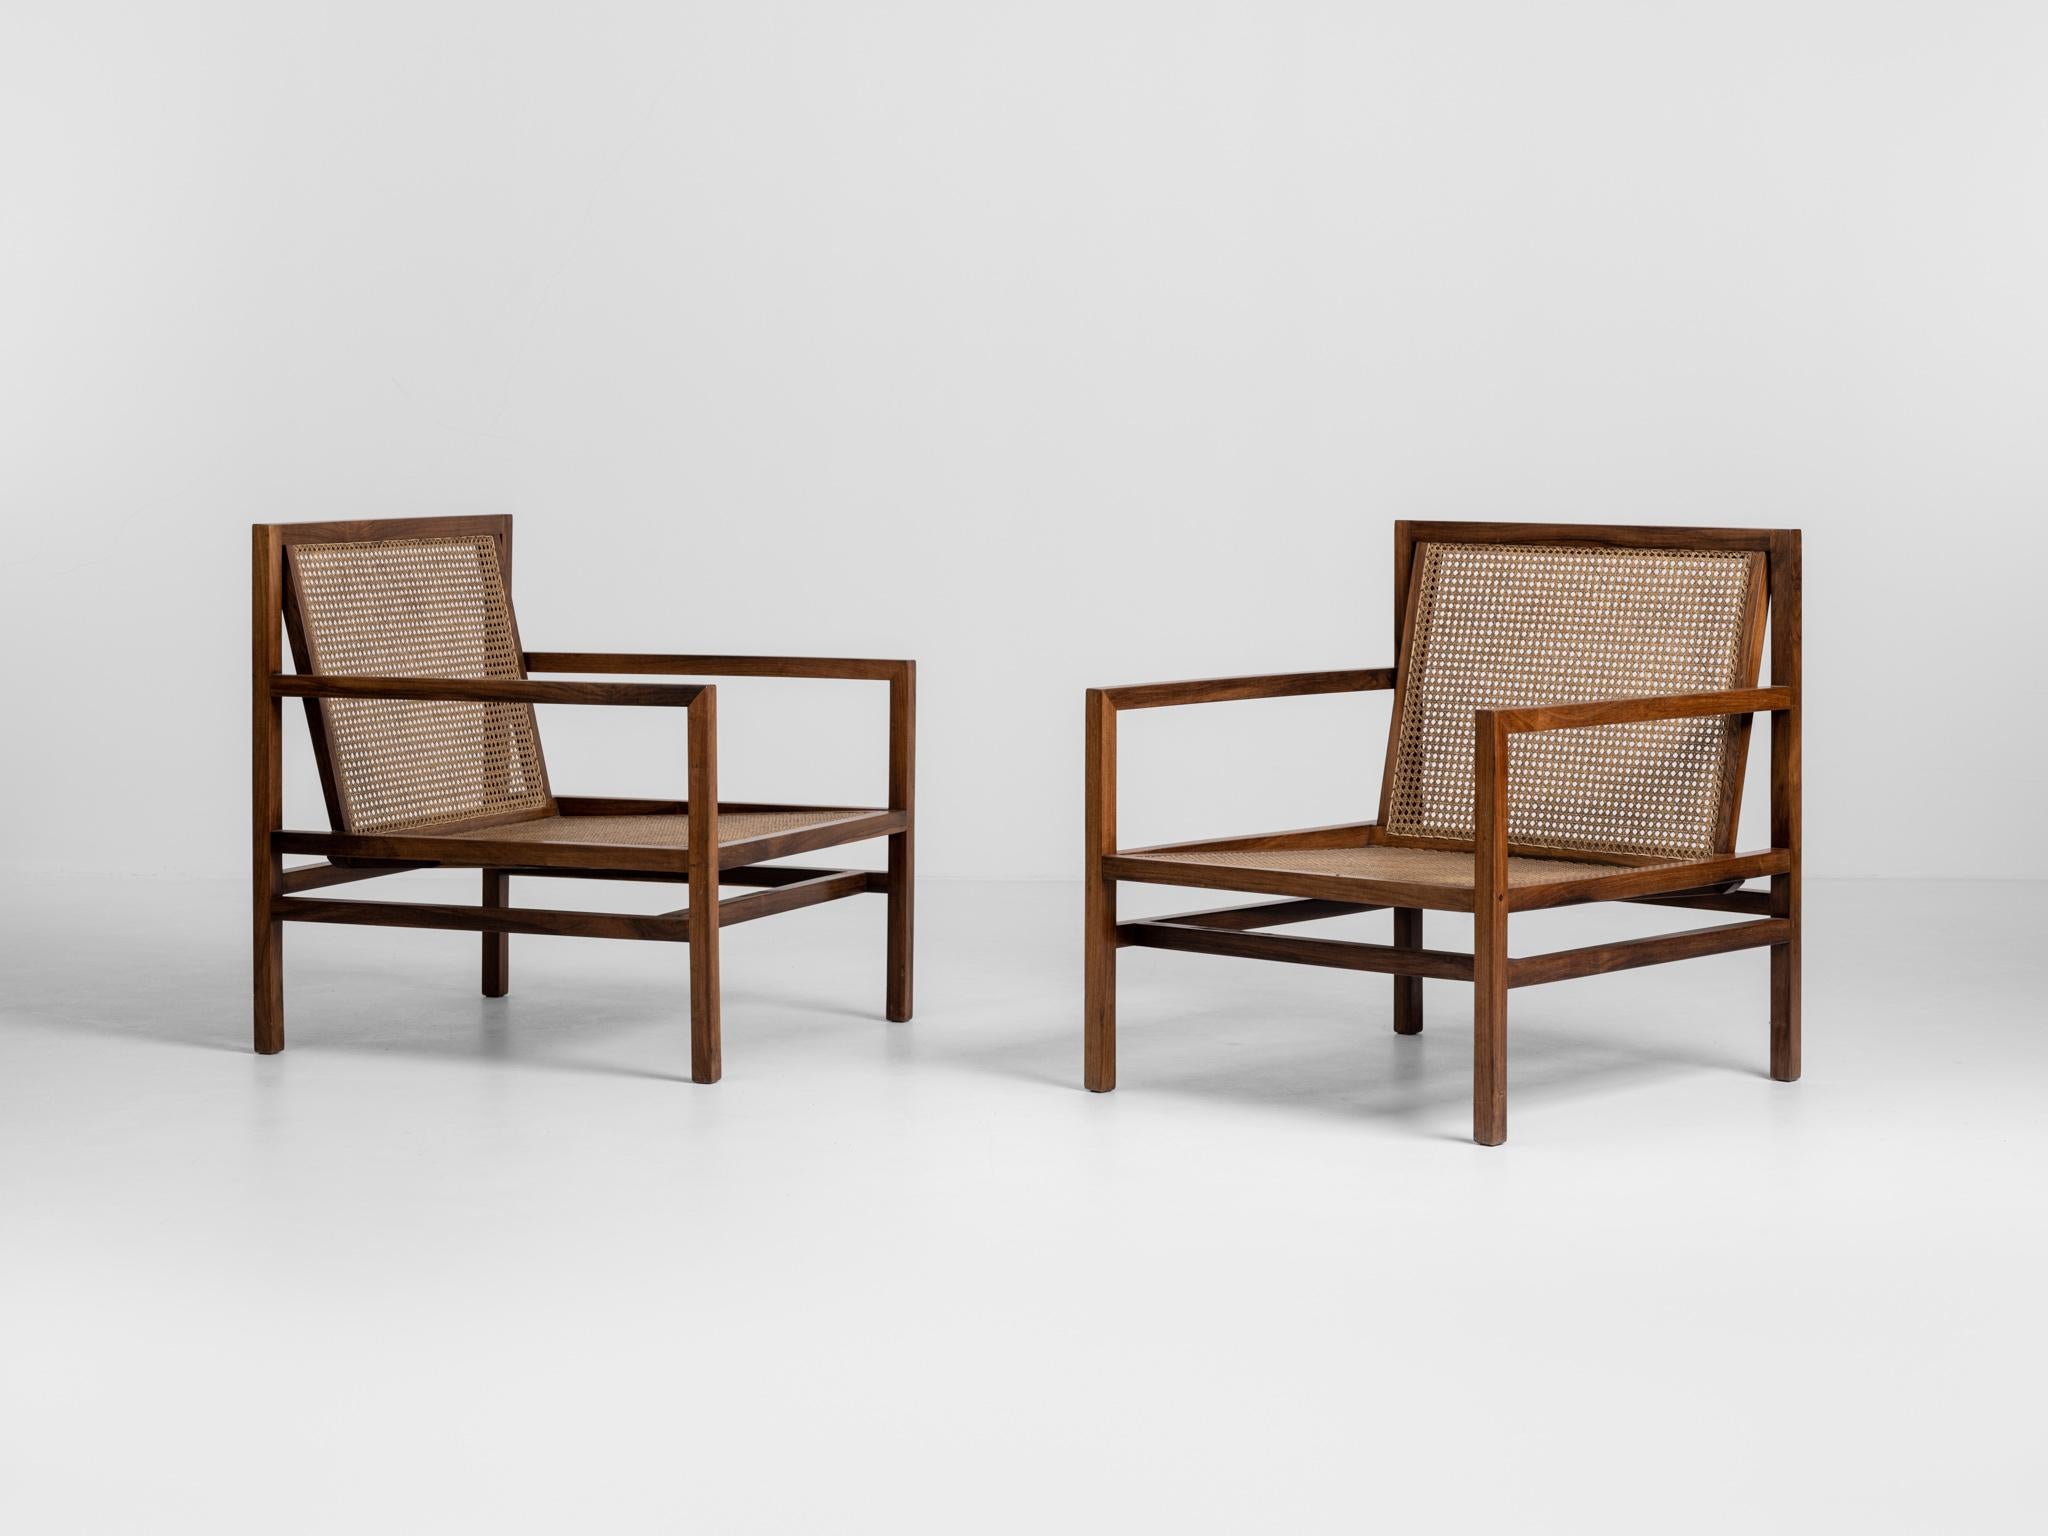 Pair of Brazilian Modern lounge chairs designed by Joachim Tenreiro. The chairs structures are made of solid Rosewood with seats and backrests in cane.

Joaquim Tenreiro (1906-1992) is known as the “father” of Brazilian modernism, being one of the